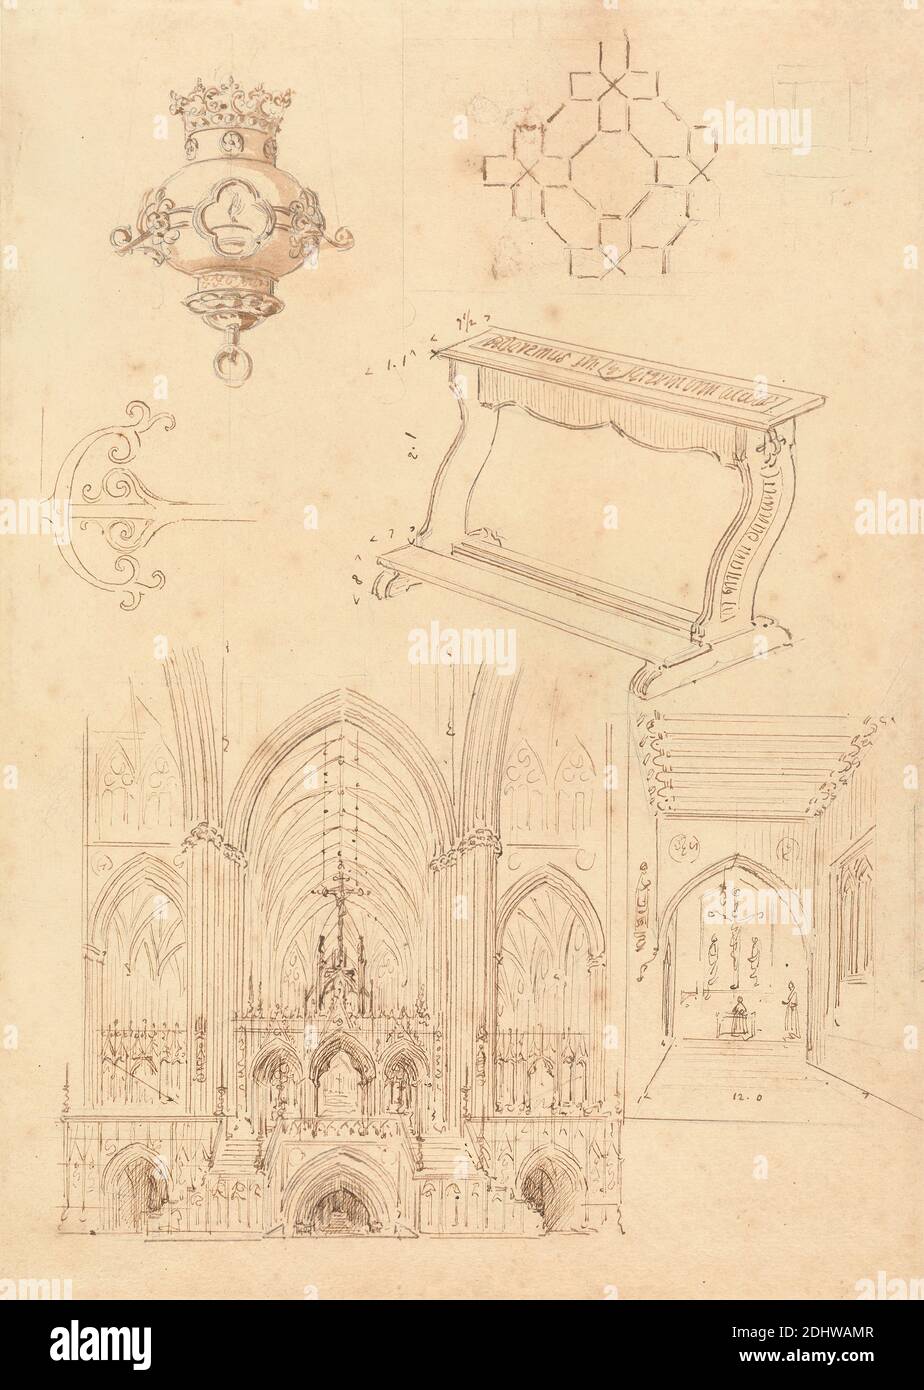 Designs for Gothic Ornamentation, a Kneeler, and Two Sketches of the Interiors of Gothic Churches, Augustus Welby Northmore Pugin, 1812–1852, British, Augustus Charles Pugin, 1762–1832, French, undated, Pen and brown ink, brown wash, and graphite on moderately thick, moderately textured, beige wove paper, Sheet: 11 1/8 × 7 7/8 inches (28.3 × 20 cm), architectural subject, churches, designs, Gothic (Medieval), interiors, kneelers (religious building fixtures), ornamentation Stock Photo